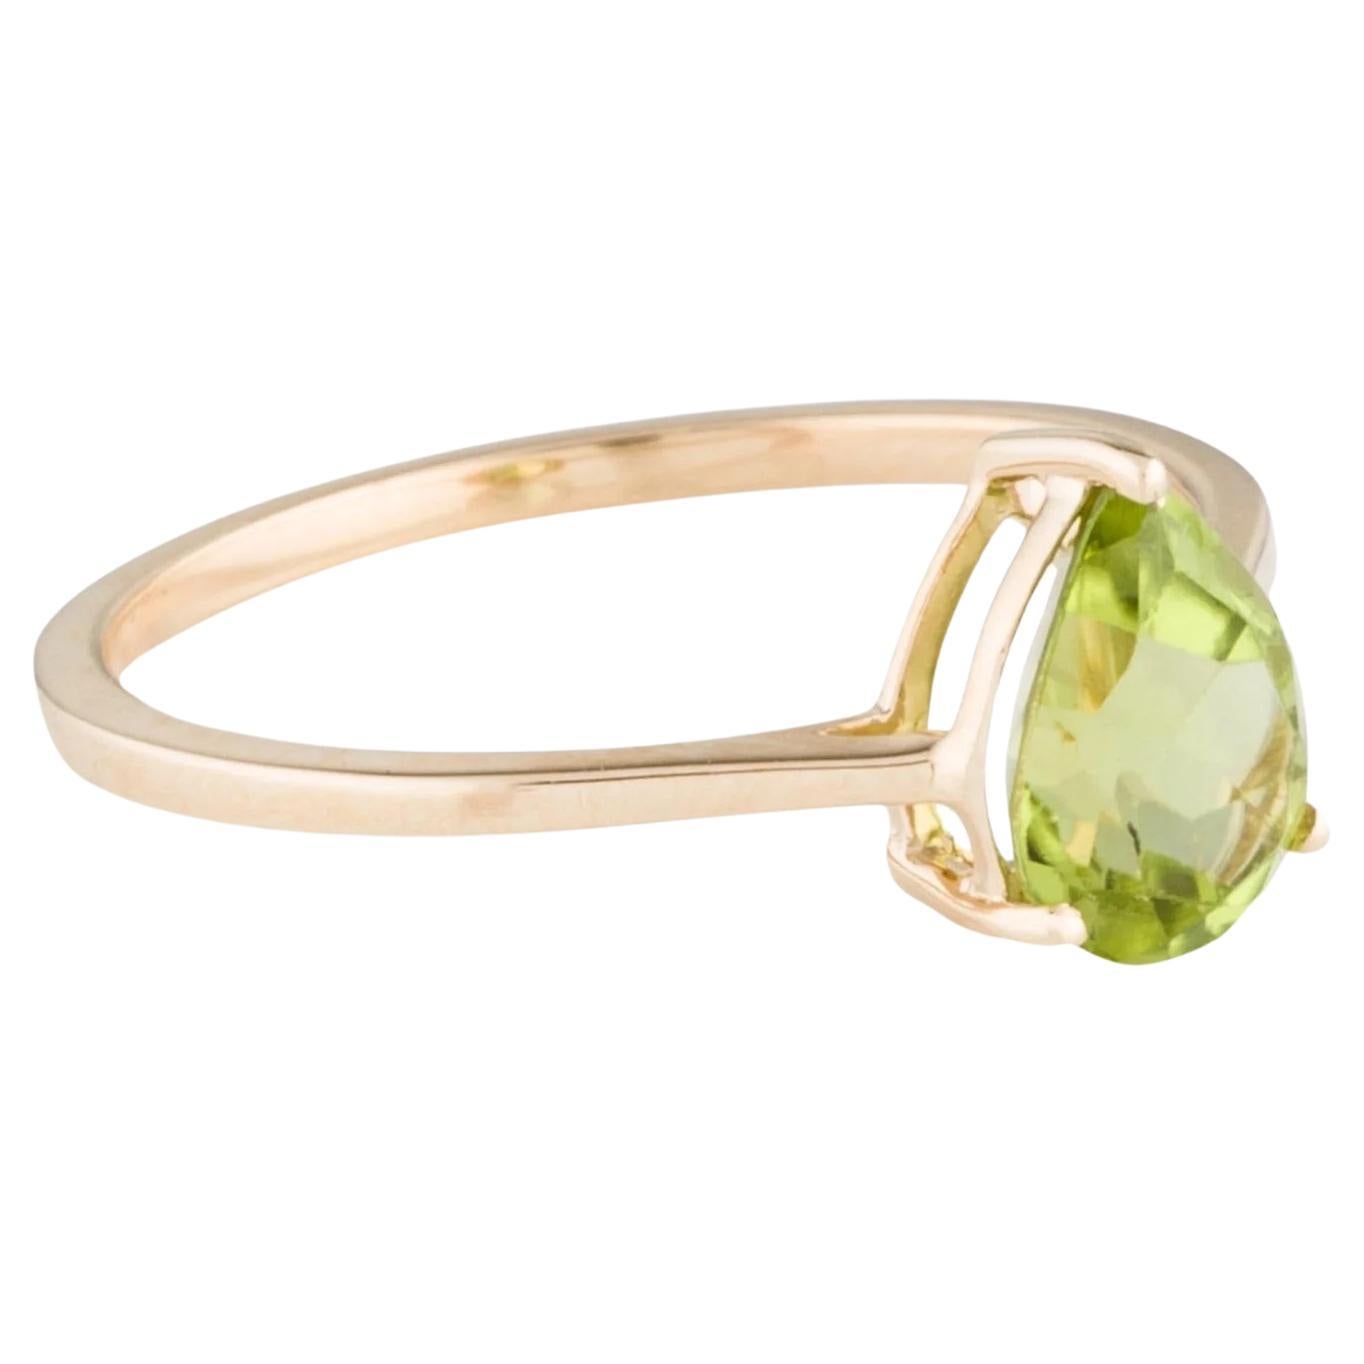 Description:
Elevate your jewelry collection with this stunning 14K Yellow Gold Peridot Cocktail Ring. Crafted to perfection, it features a captivating Pear Modified Brilliant Peridot, exuding timeless elegance. The exquisite design is complemented